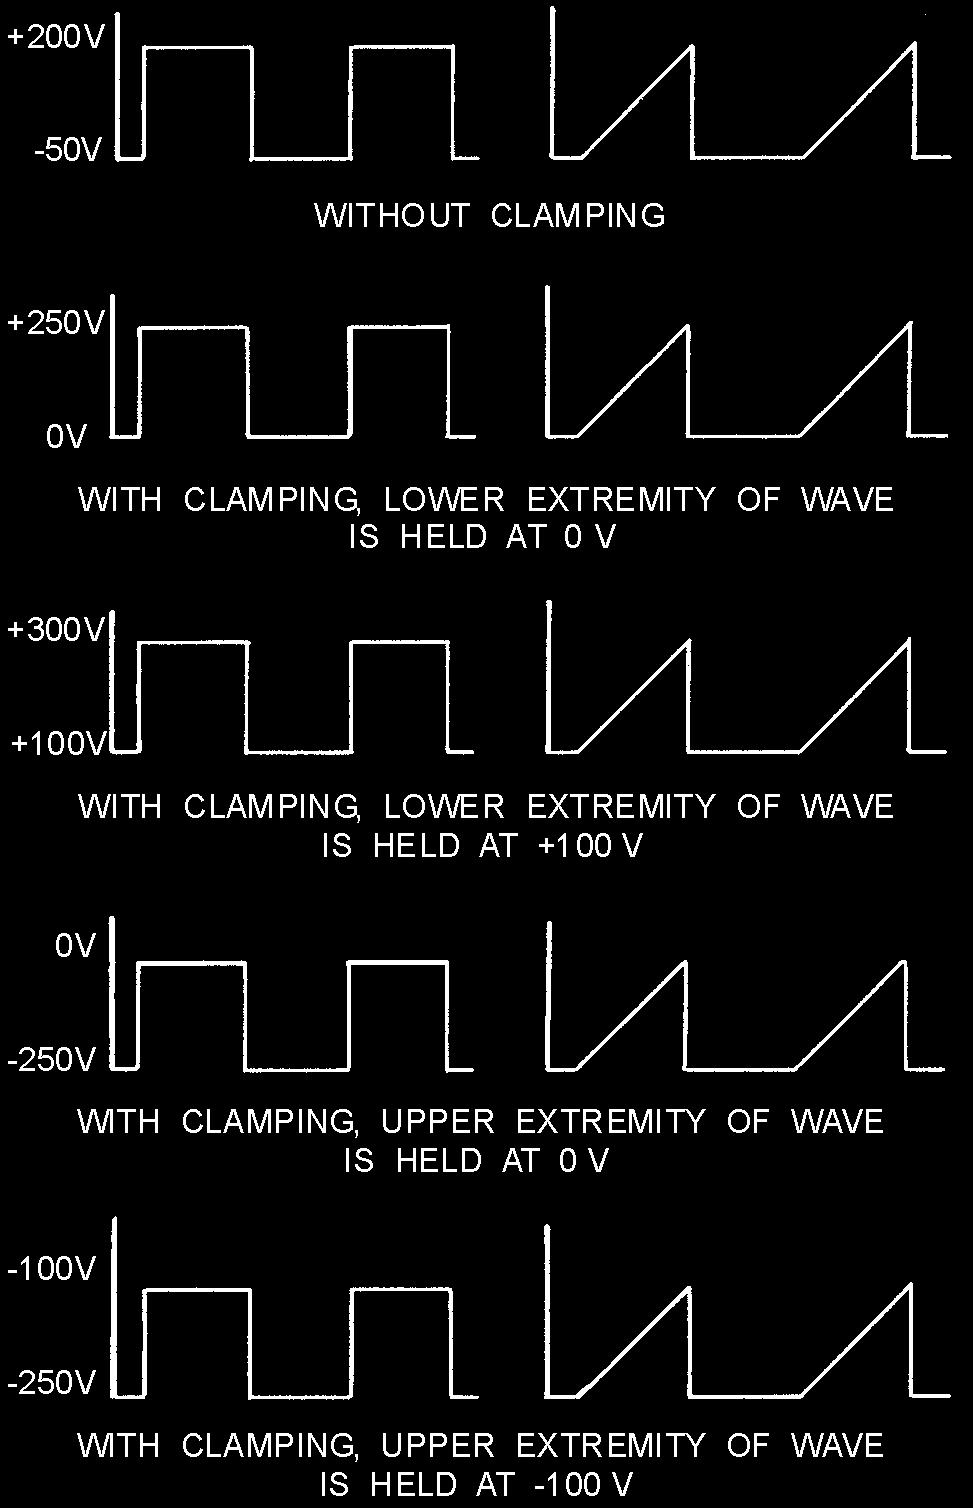 A CLAMPING CIRCUIT effectively clamps or ties down the upper or lower extremity of a waveform to a fixed dc potential.